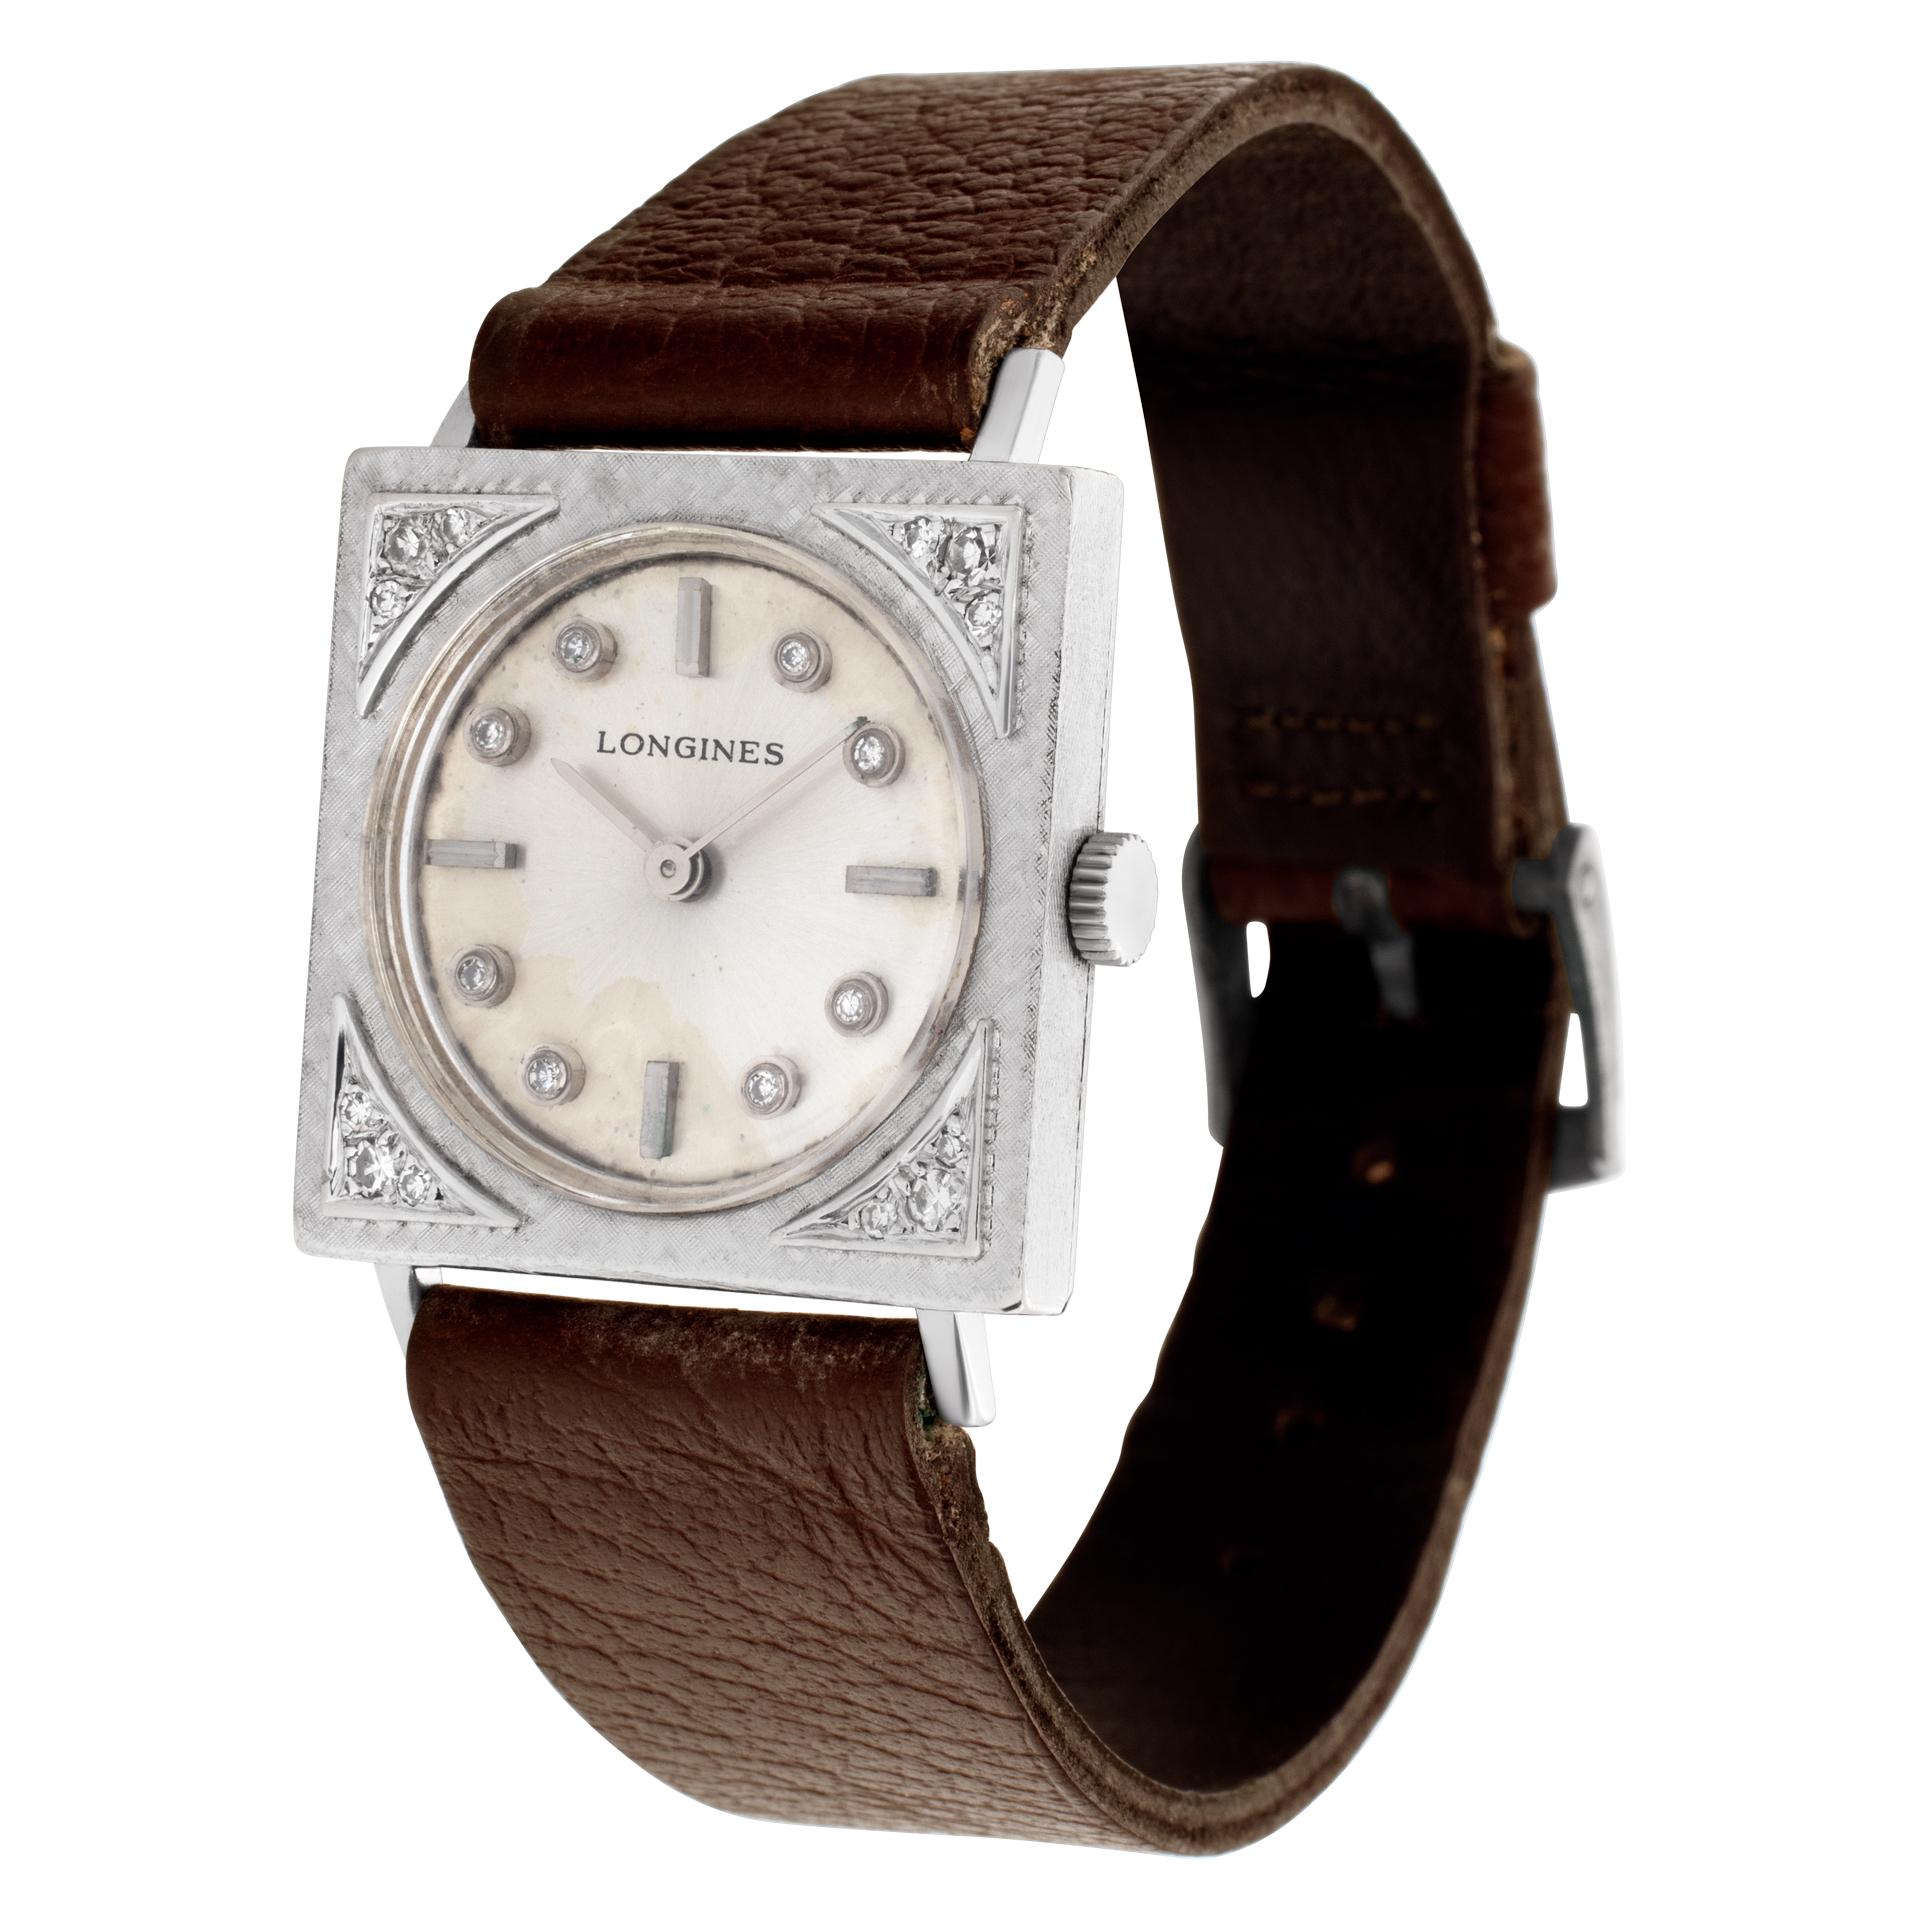 Longines Vintage Classic in 14k white gold on tan leather strap. Manual. 25 mm case size. Fine Pre-owned Longines Watch. Certified preowned Vintage Longines Classic watch is made out of white gold on a Brown Leather strap. This Longines watch has a